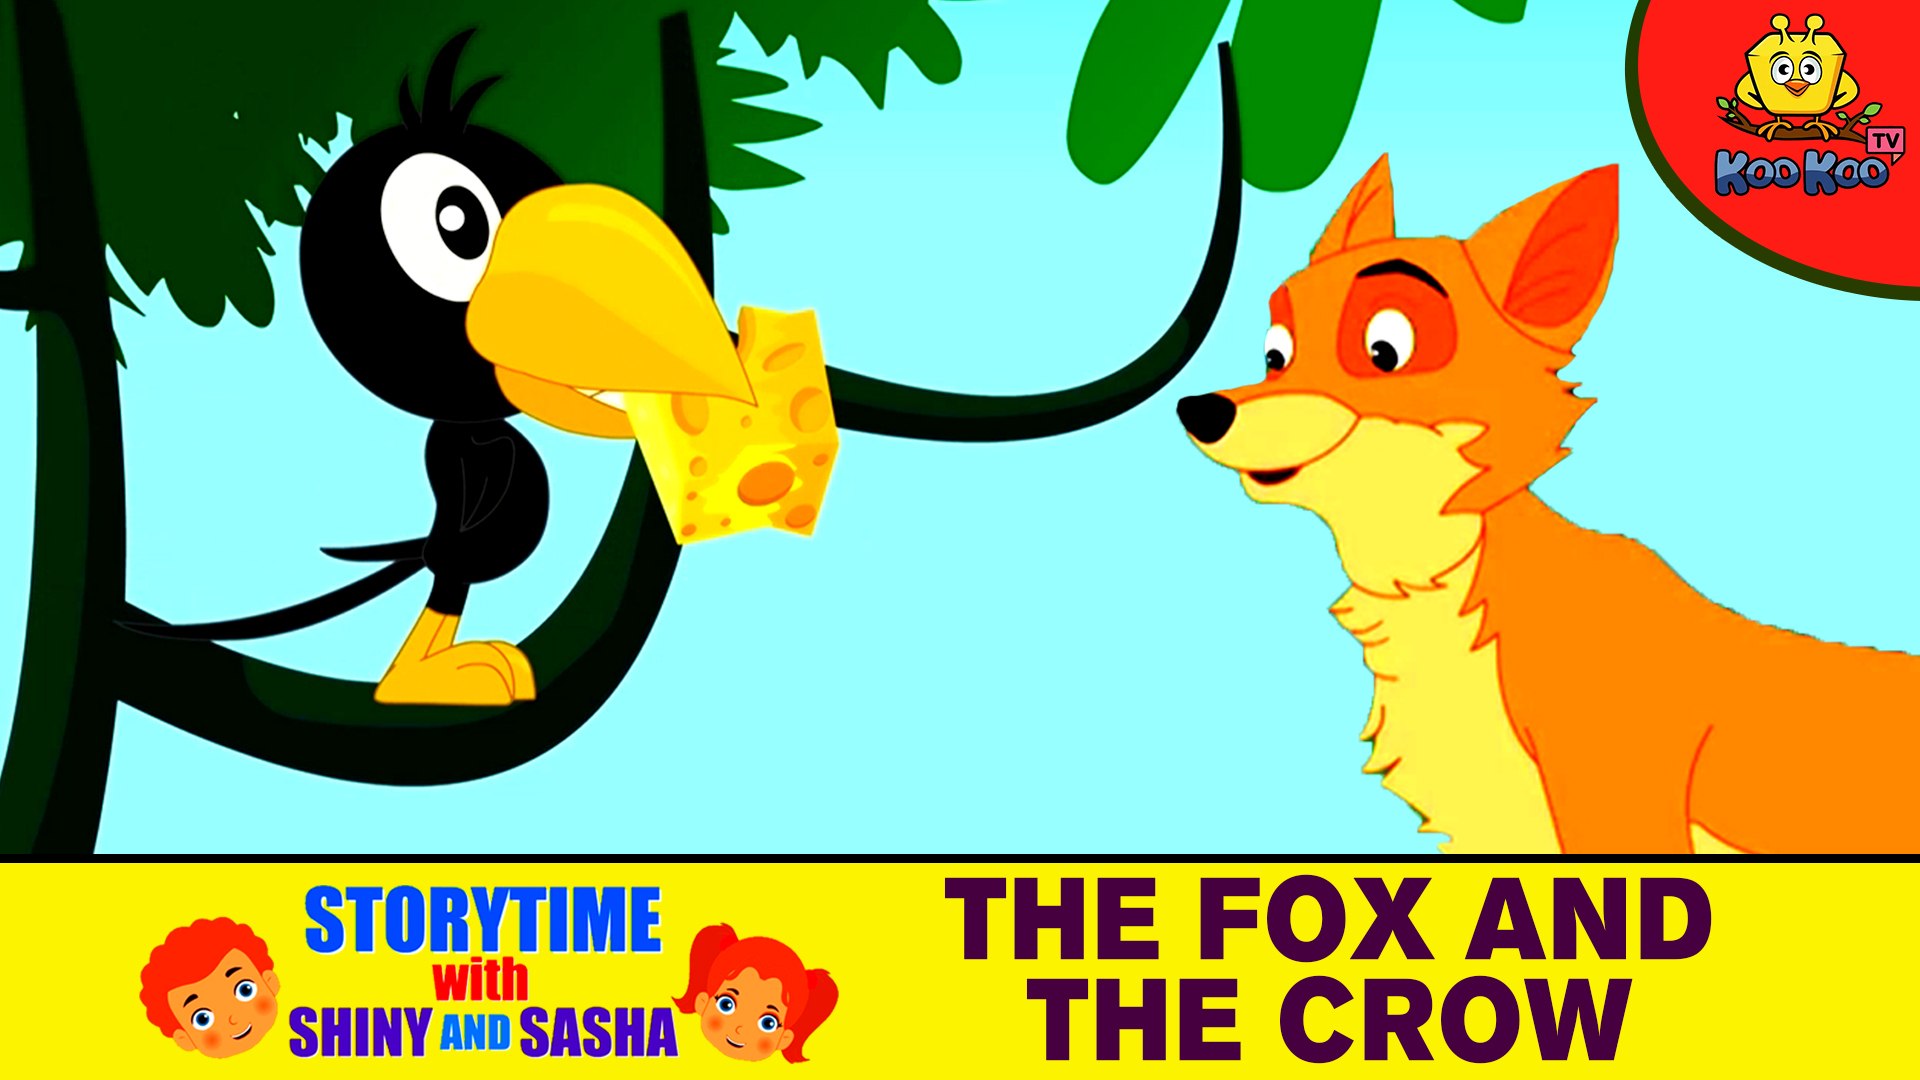 The Fox and The Crow | Kids Moral Stories | Stories For Kids In English |  Koo Koo Tv - video Dailymotion